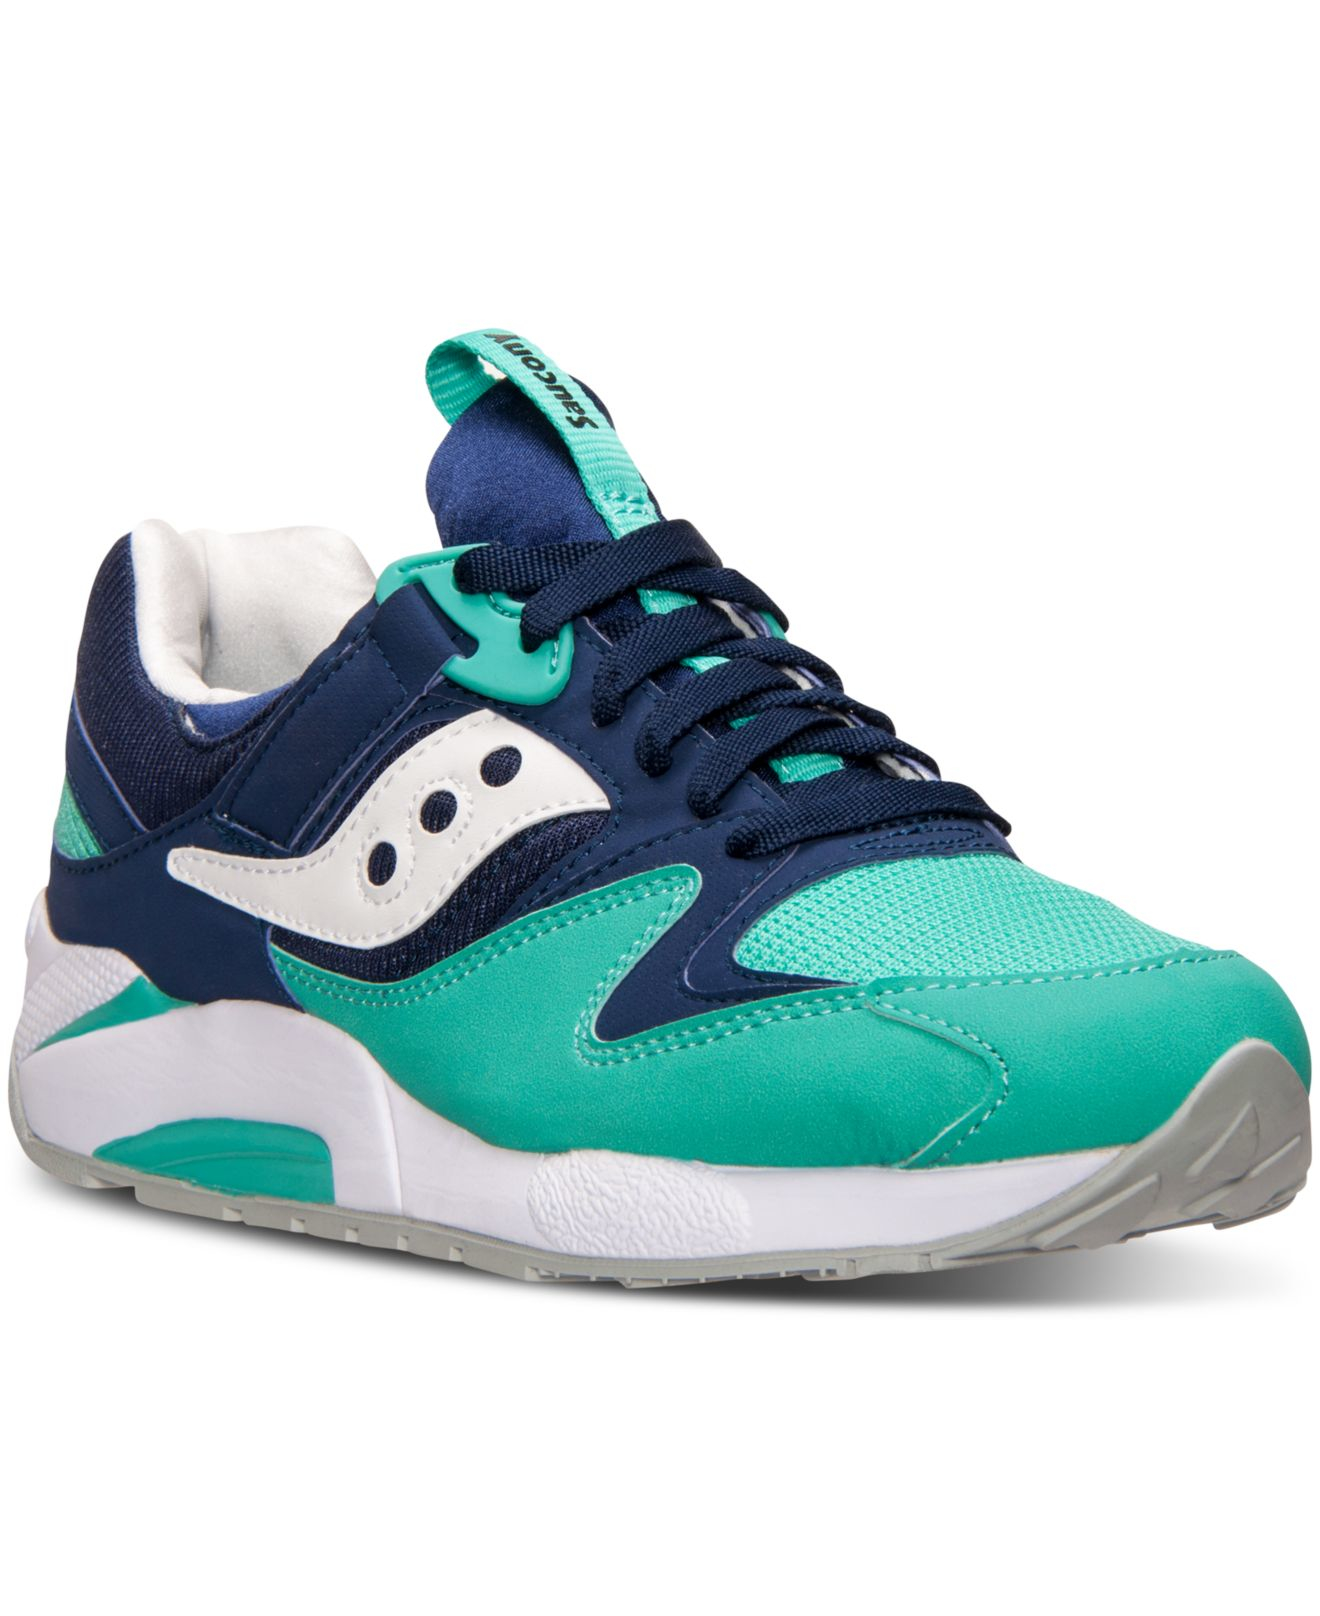 saucony shoes on sale, OFF 74%,Buy!